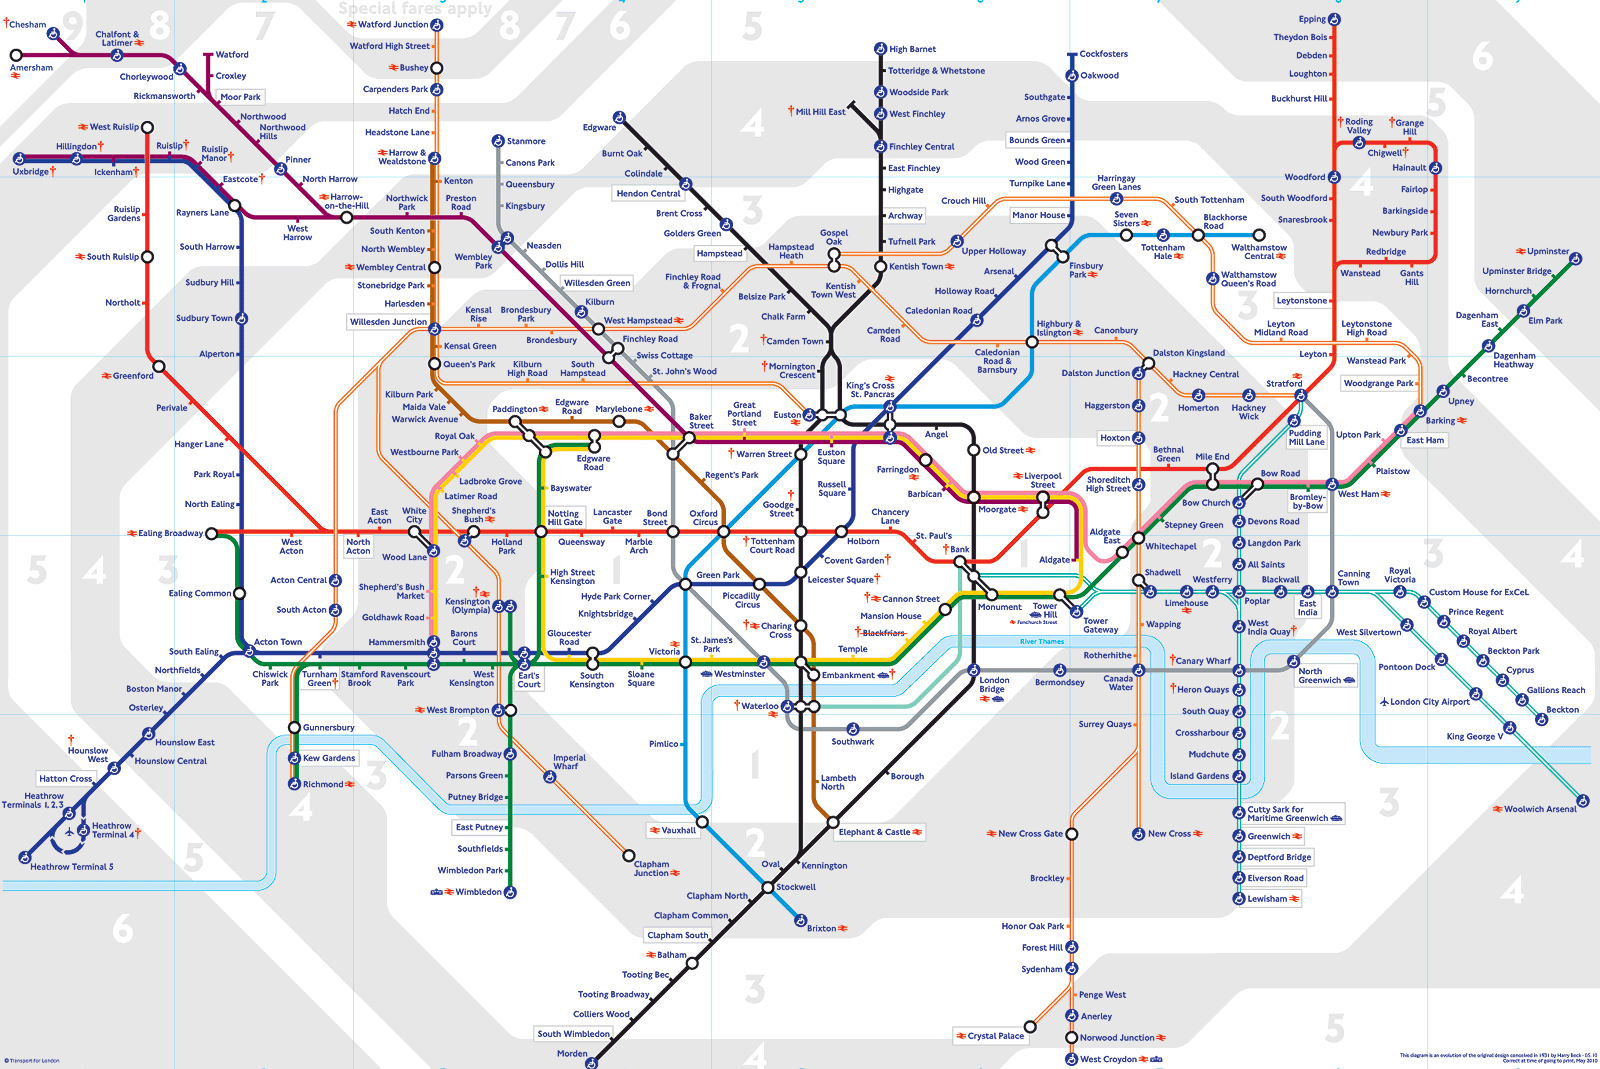 Map of the London Underground system